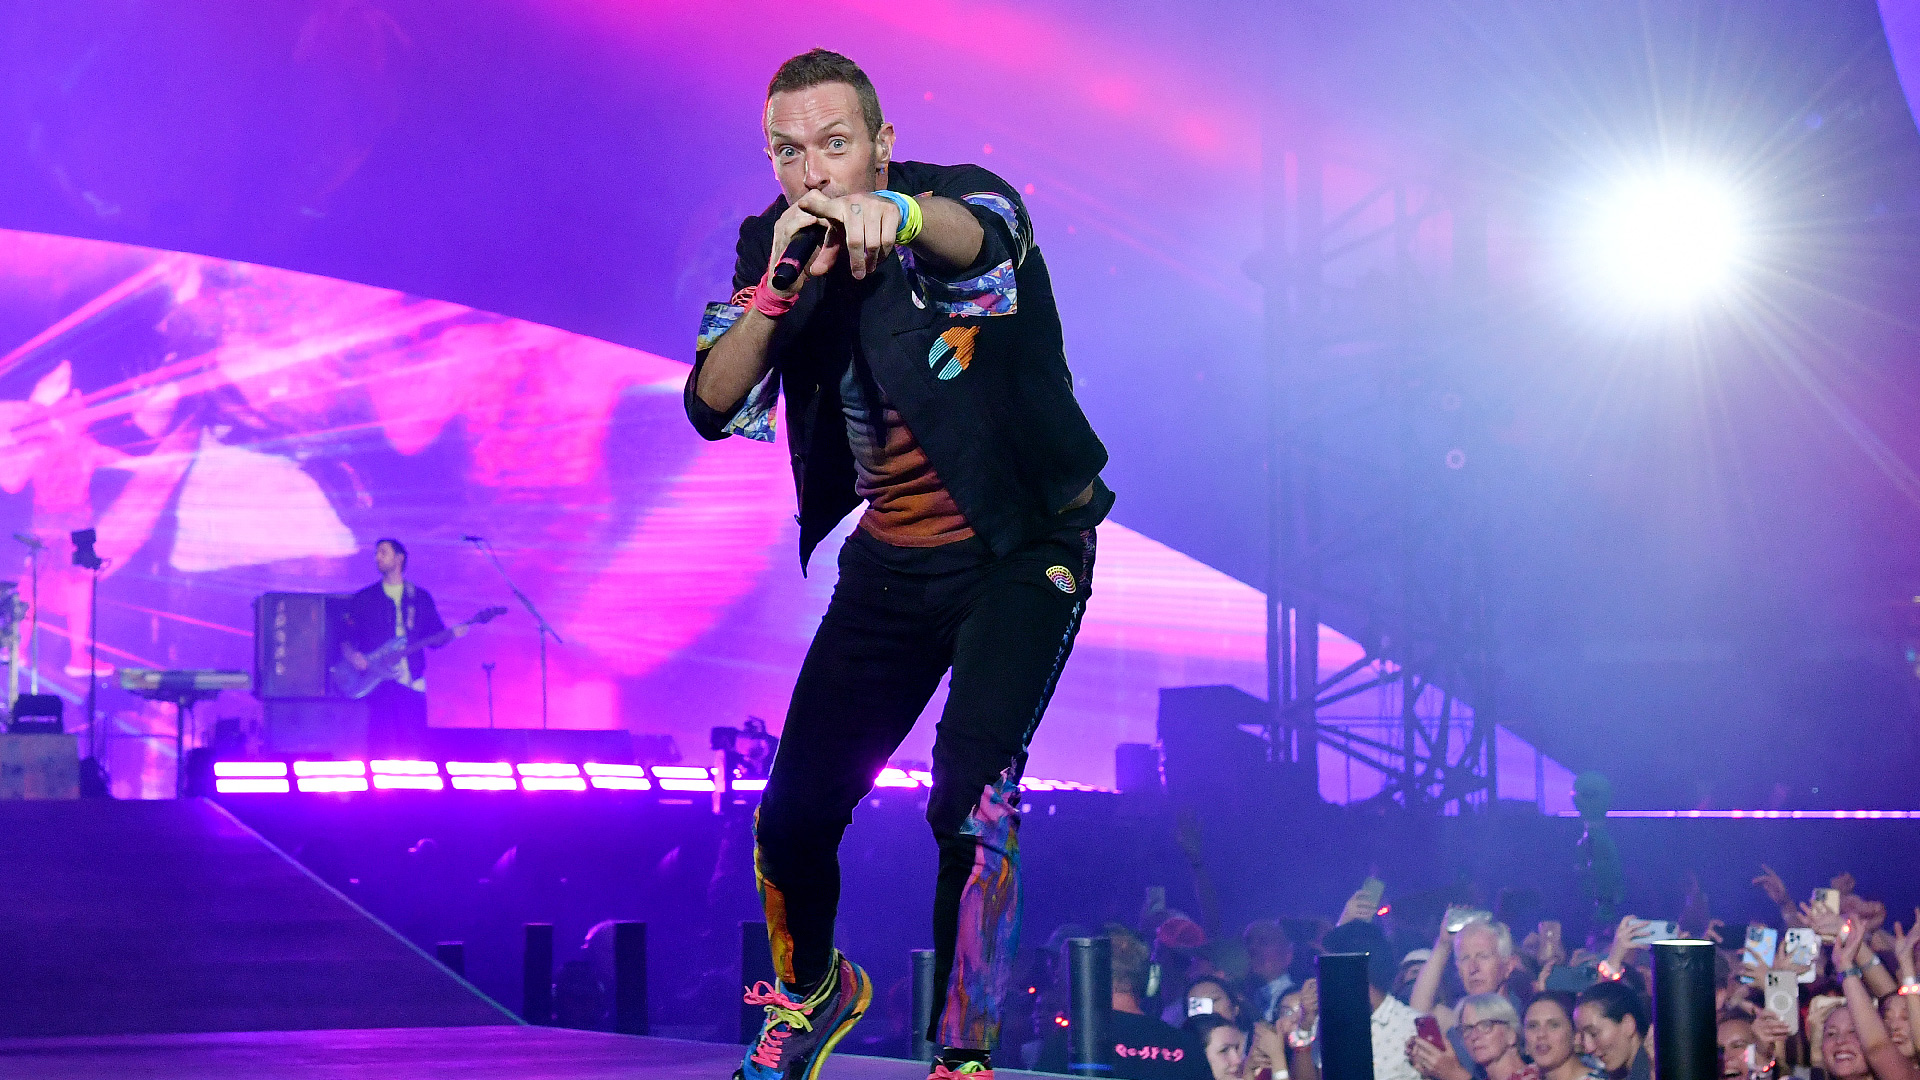 Chris Martin of Coldplay performs on stage at Wembley Stadium during the 'Music of the Spheres' World Tour on August 12, 2022 in London, England.